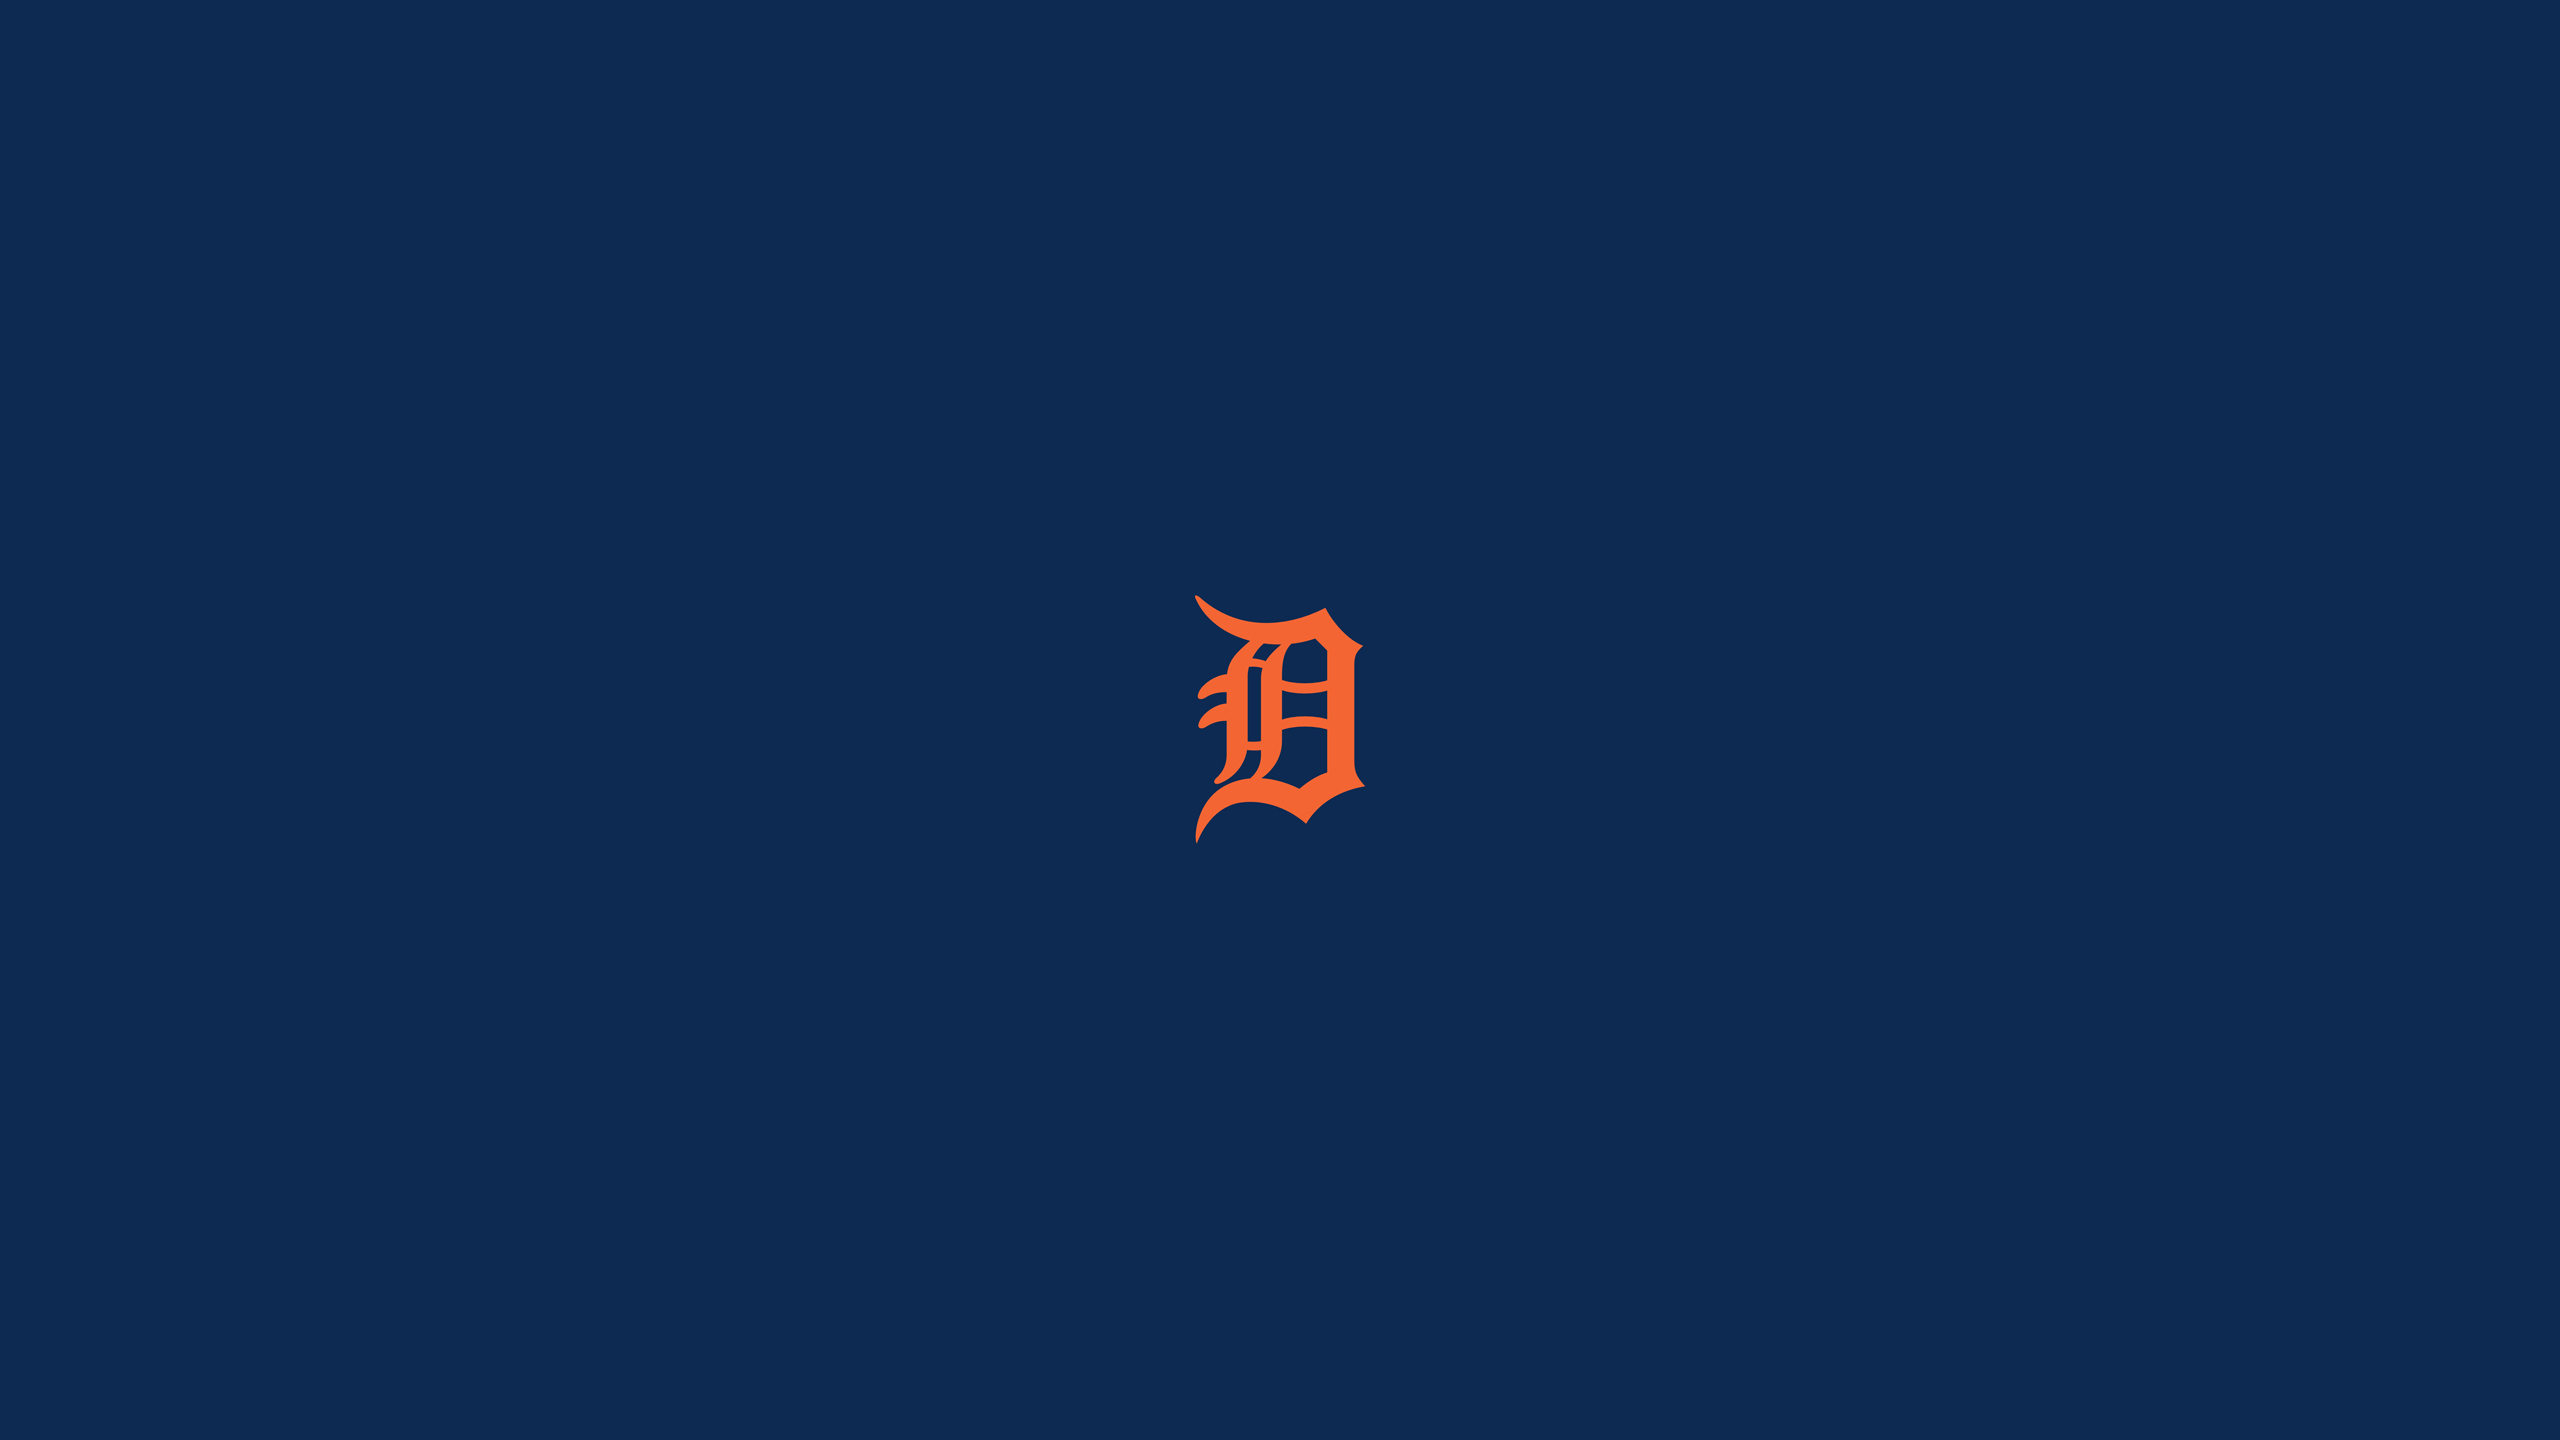 Detroit Tigers Image Crazy Gallery